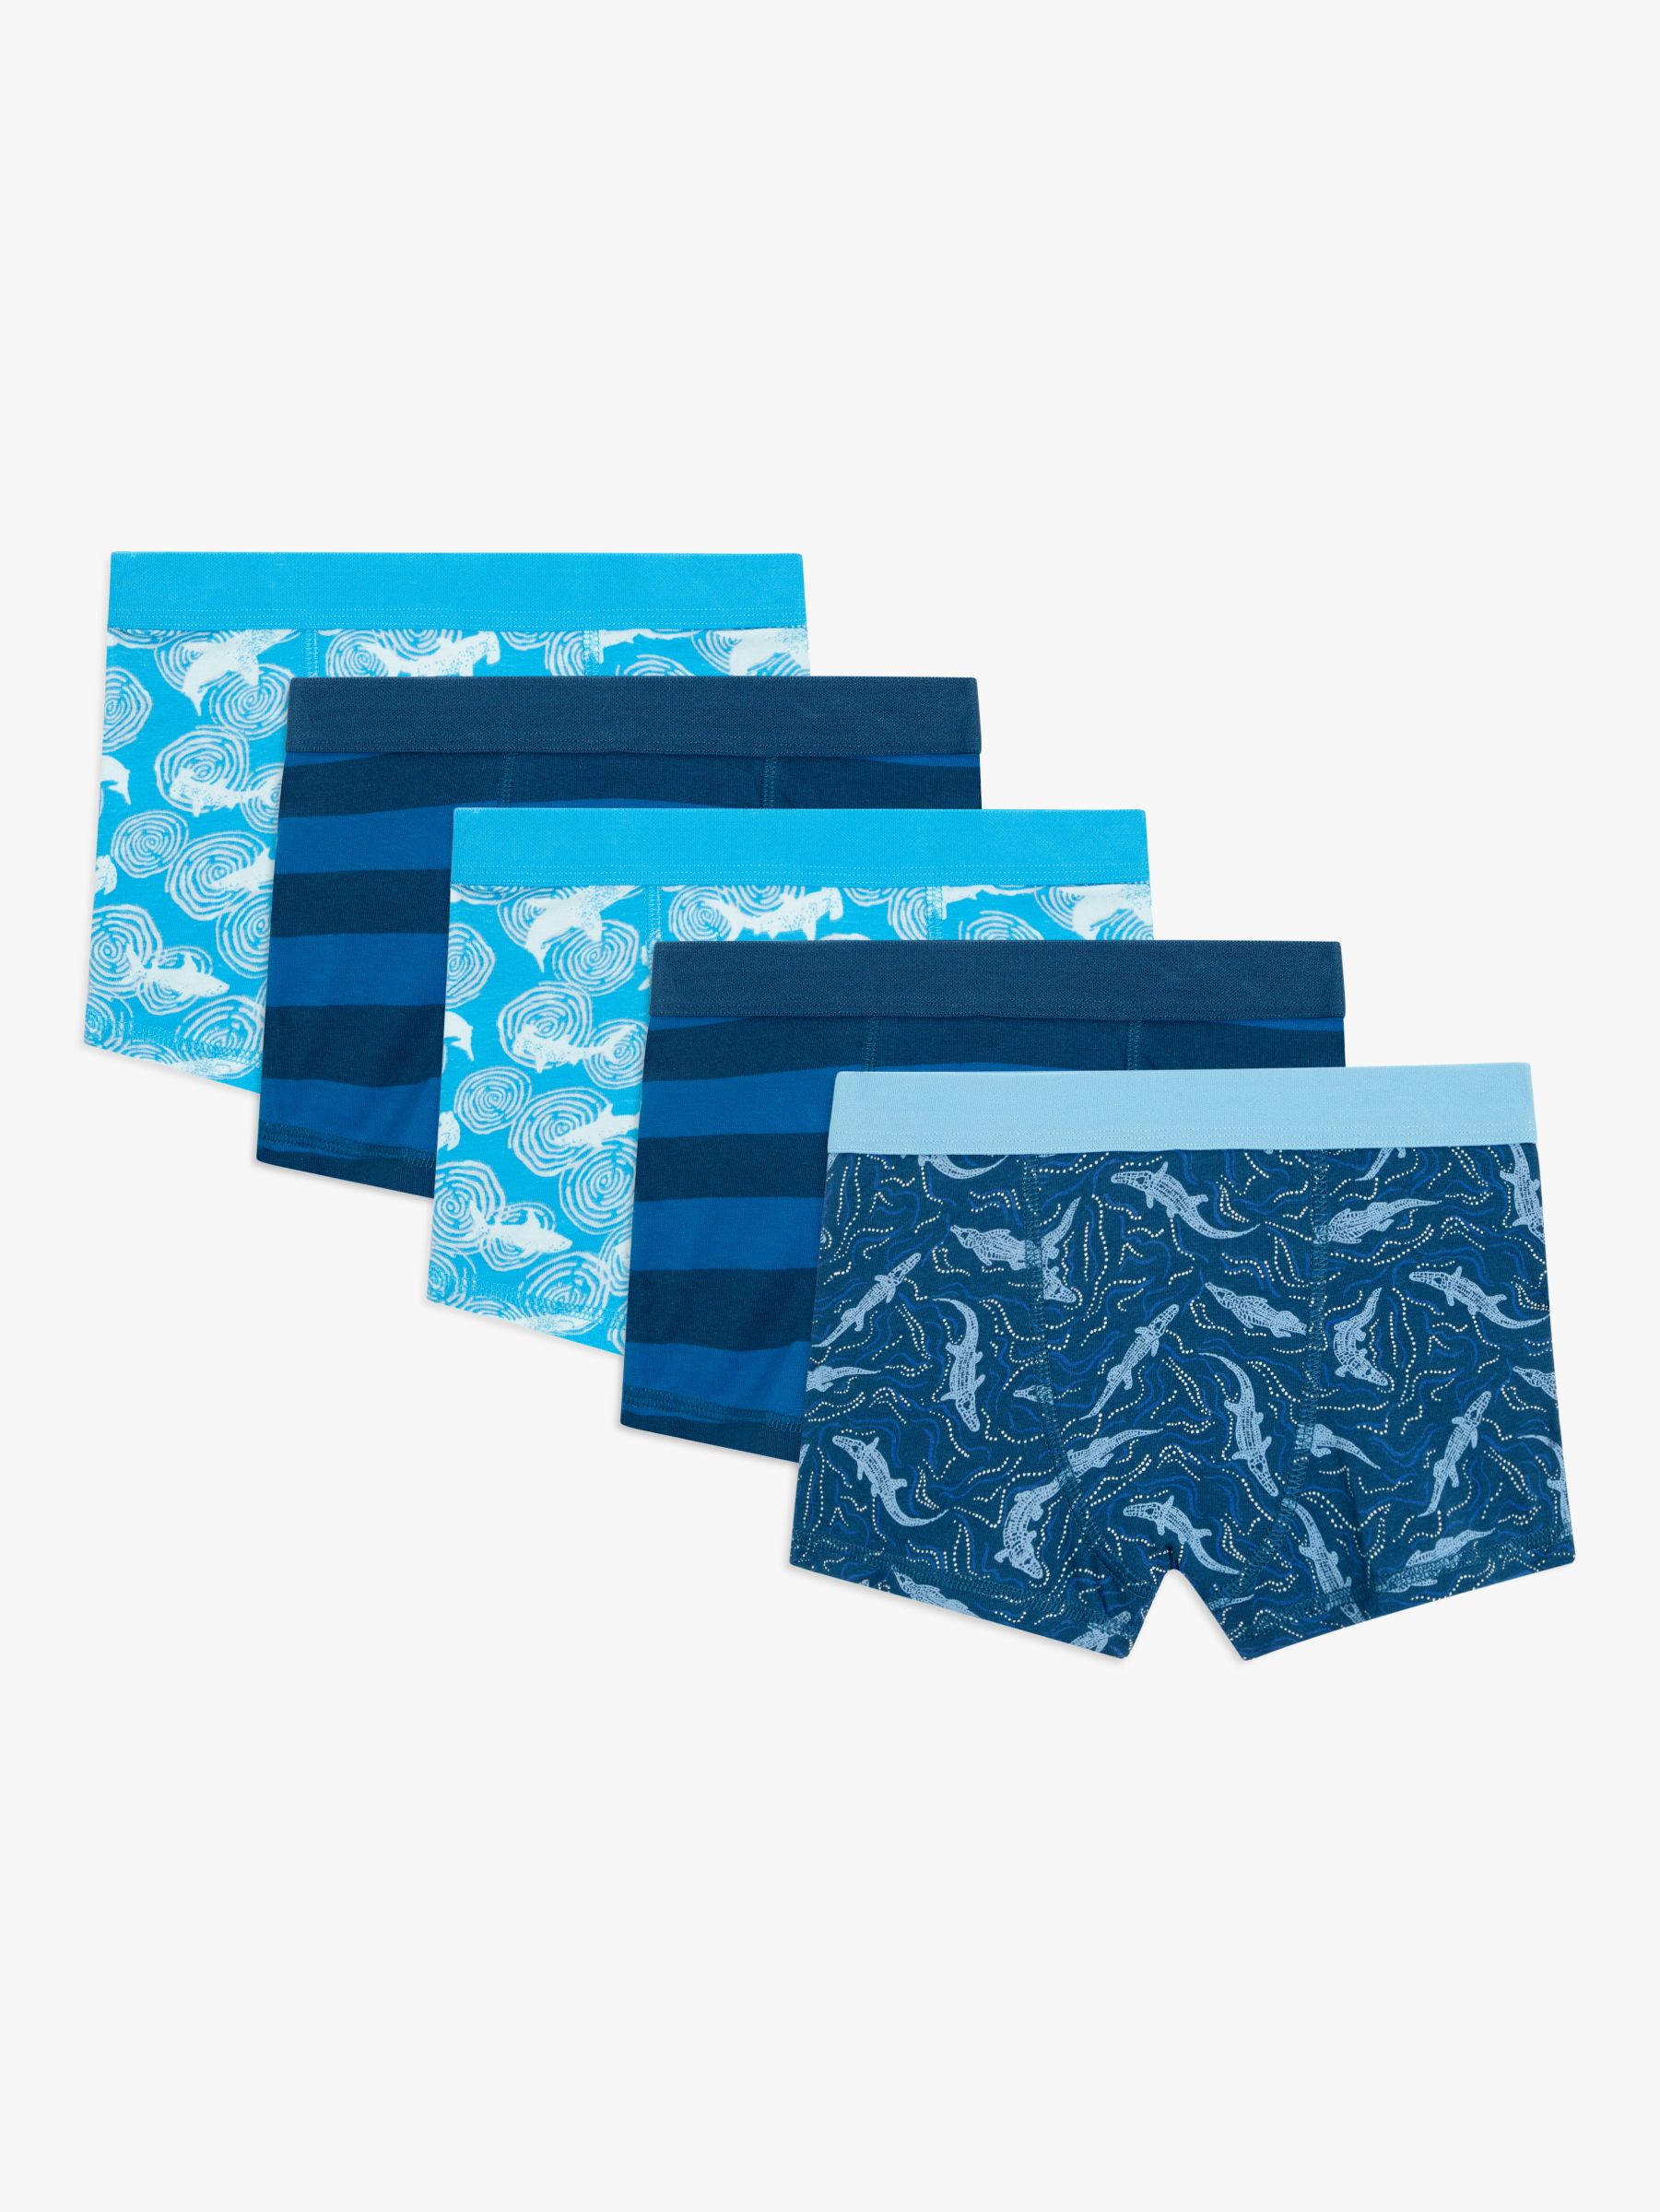 7-pack of crocodile print briefs - Boxers - ACCESSORIES - Boy